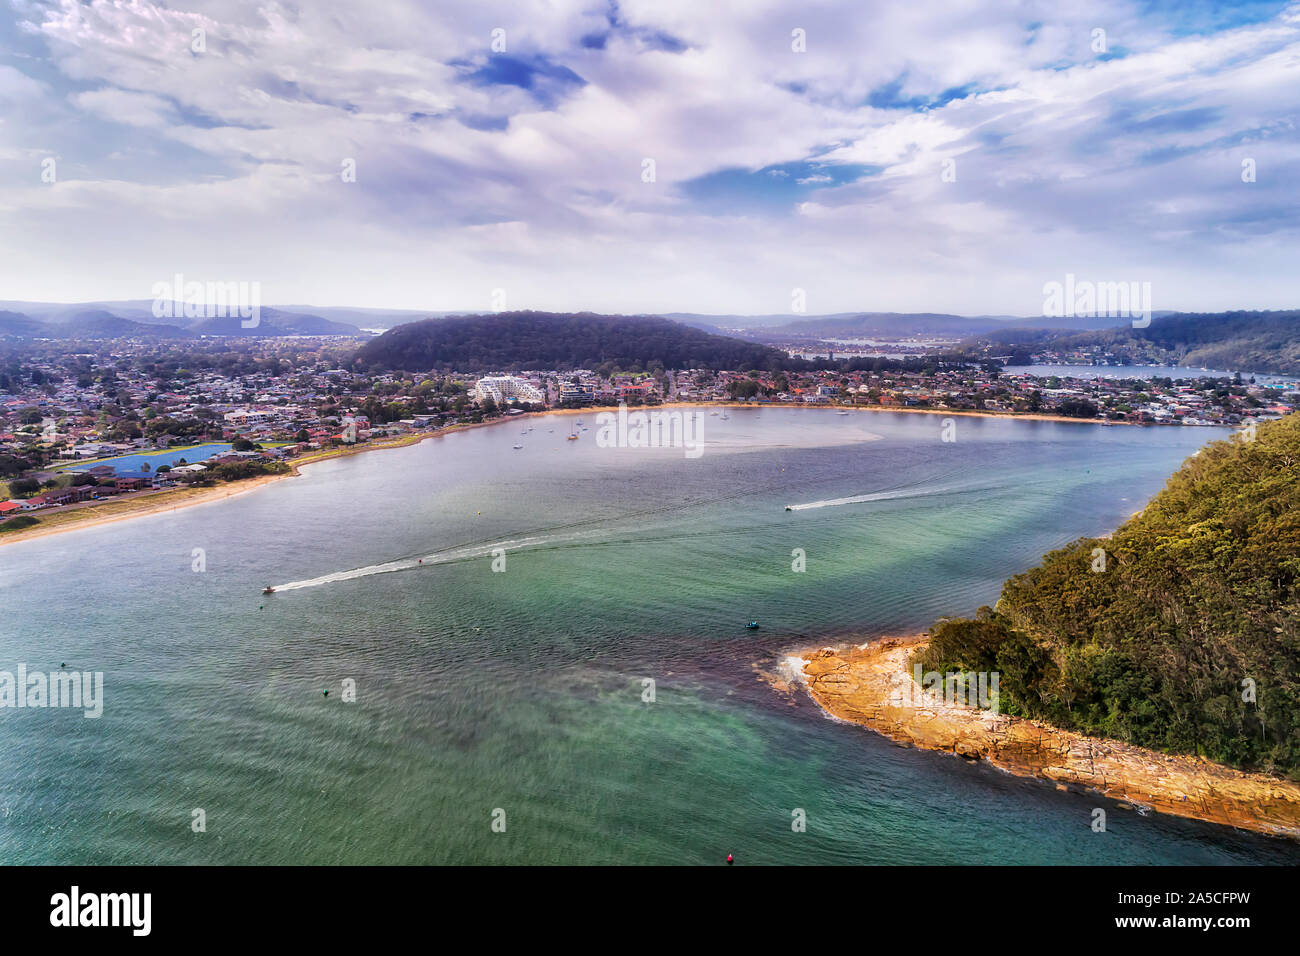 Woy Woy, Ettalong and GOsford towns of the Central coast in NSW state, Australia - aerial elevated view over broken bay between Box head and jugged co Stock Photo